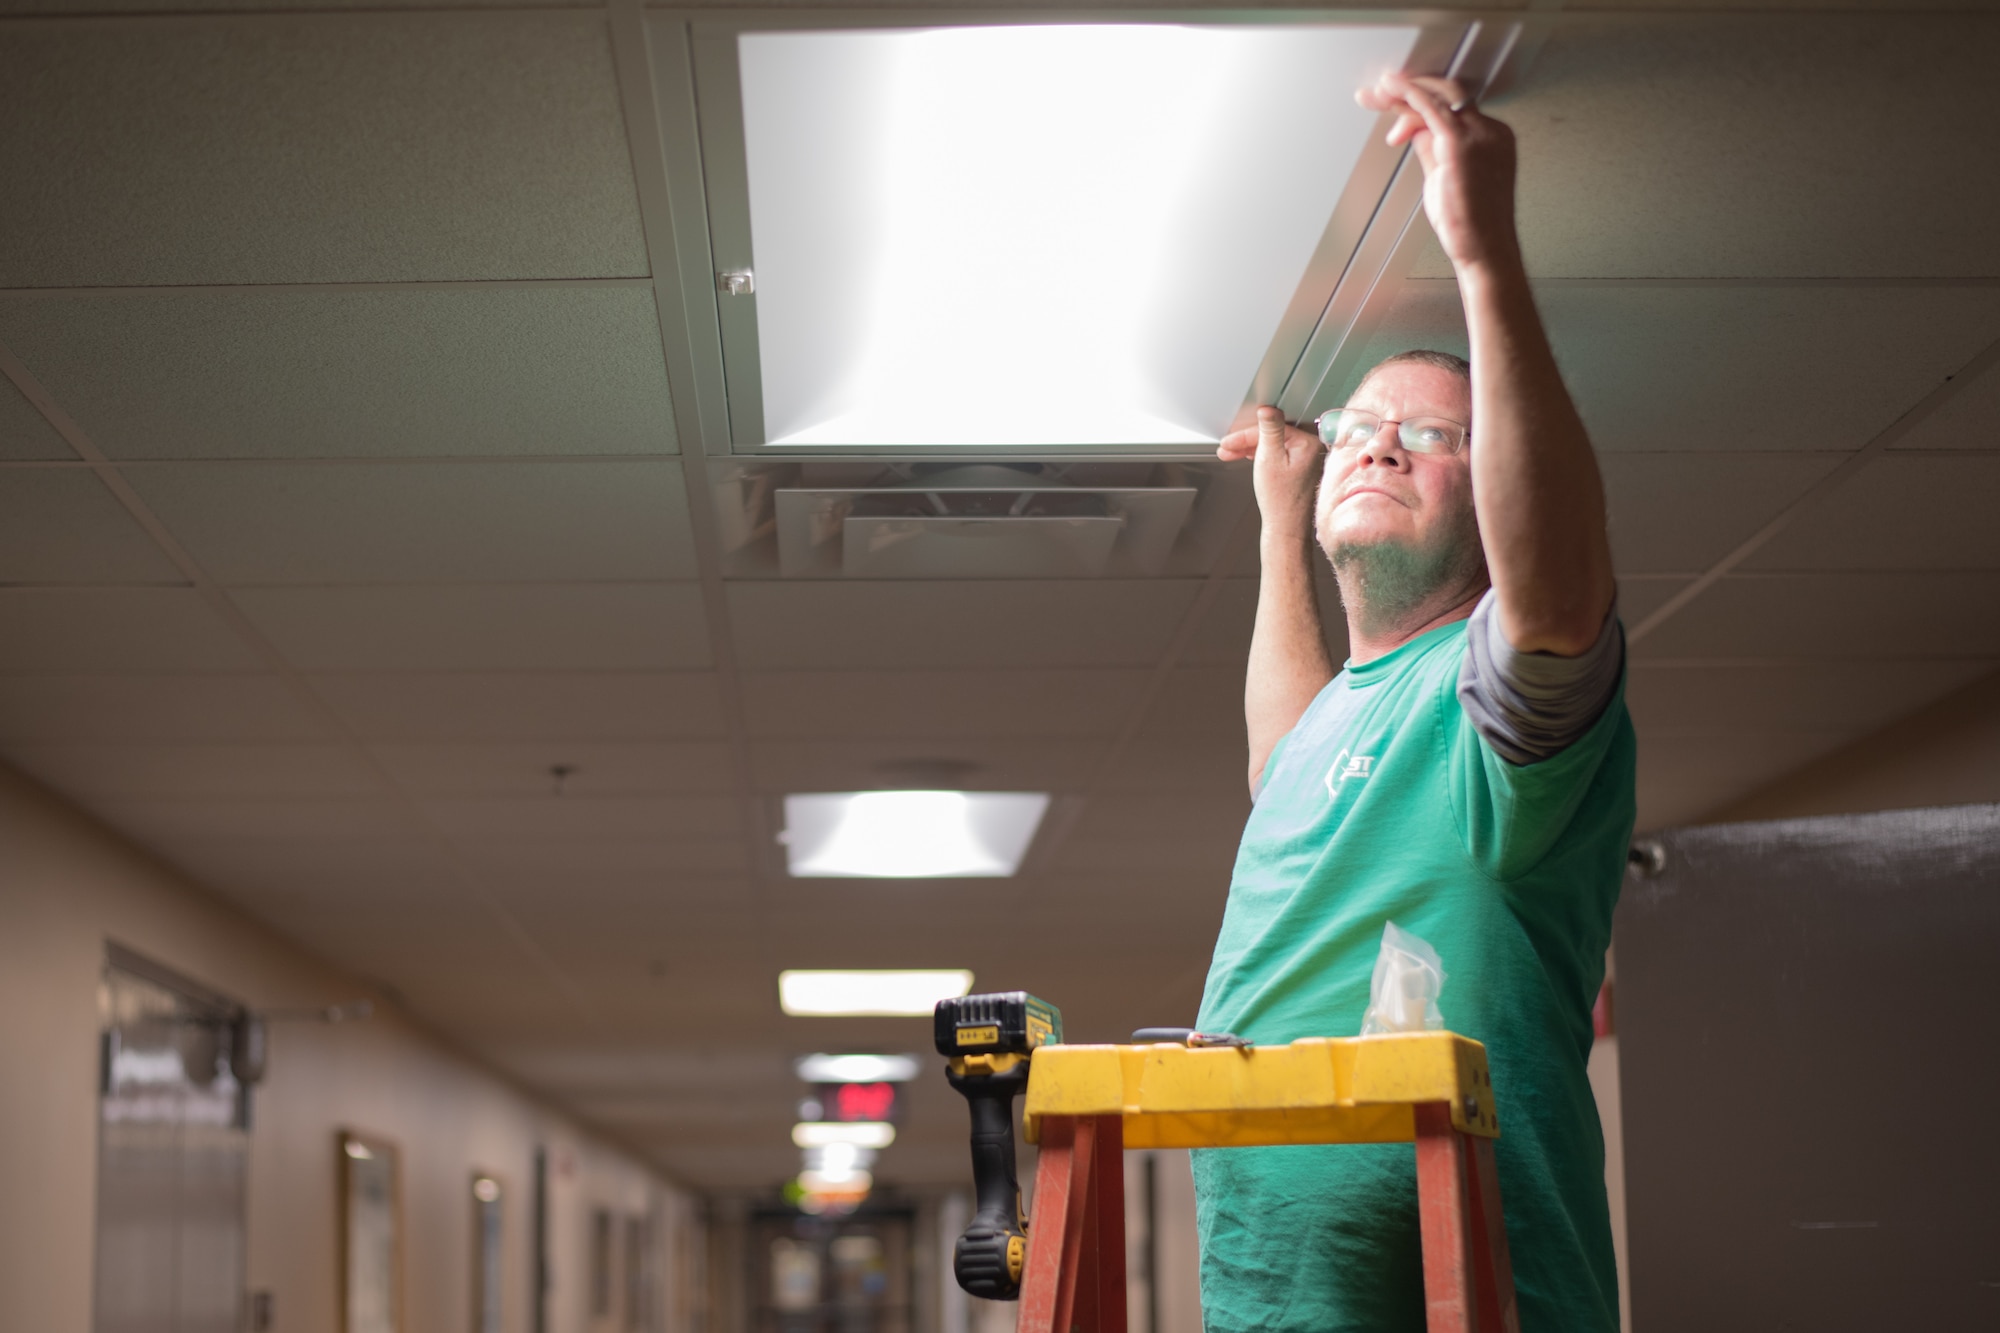 42nd CES to save base millions of kWh/year with LED light upgrades